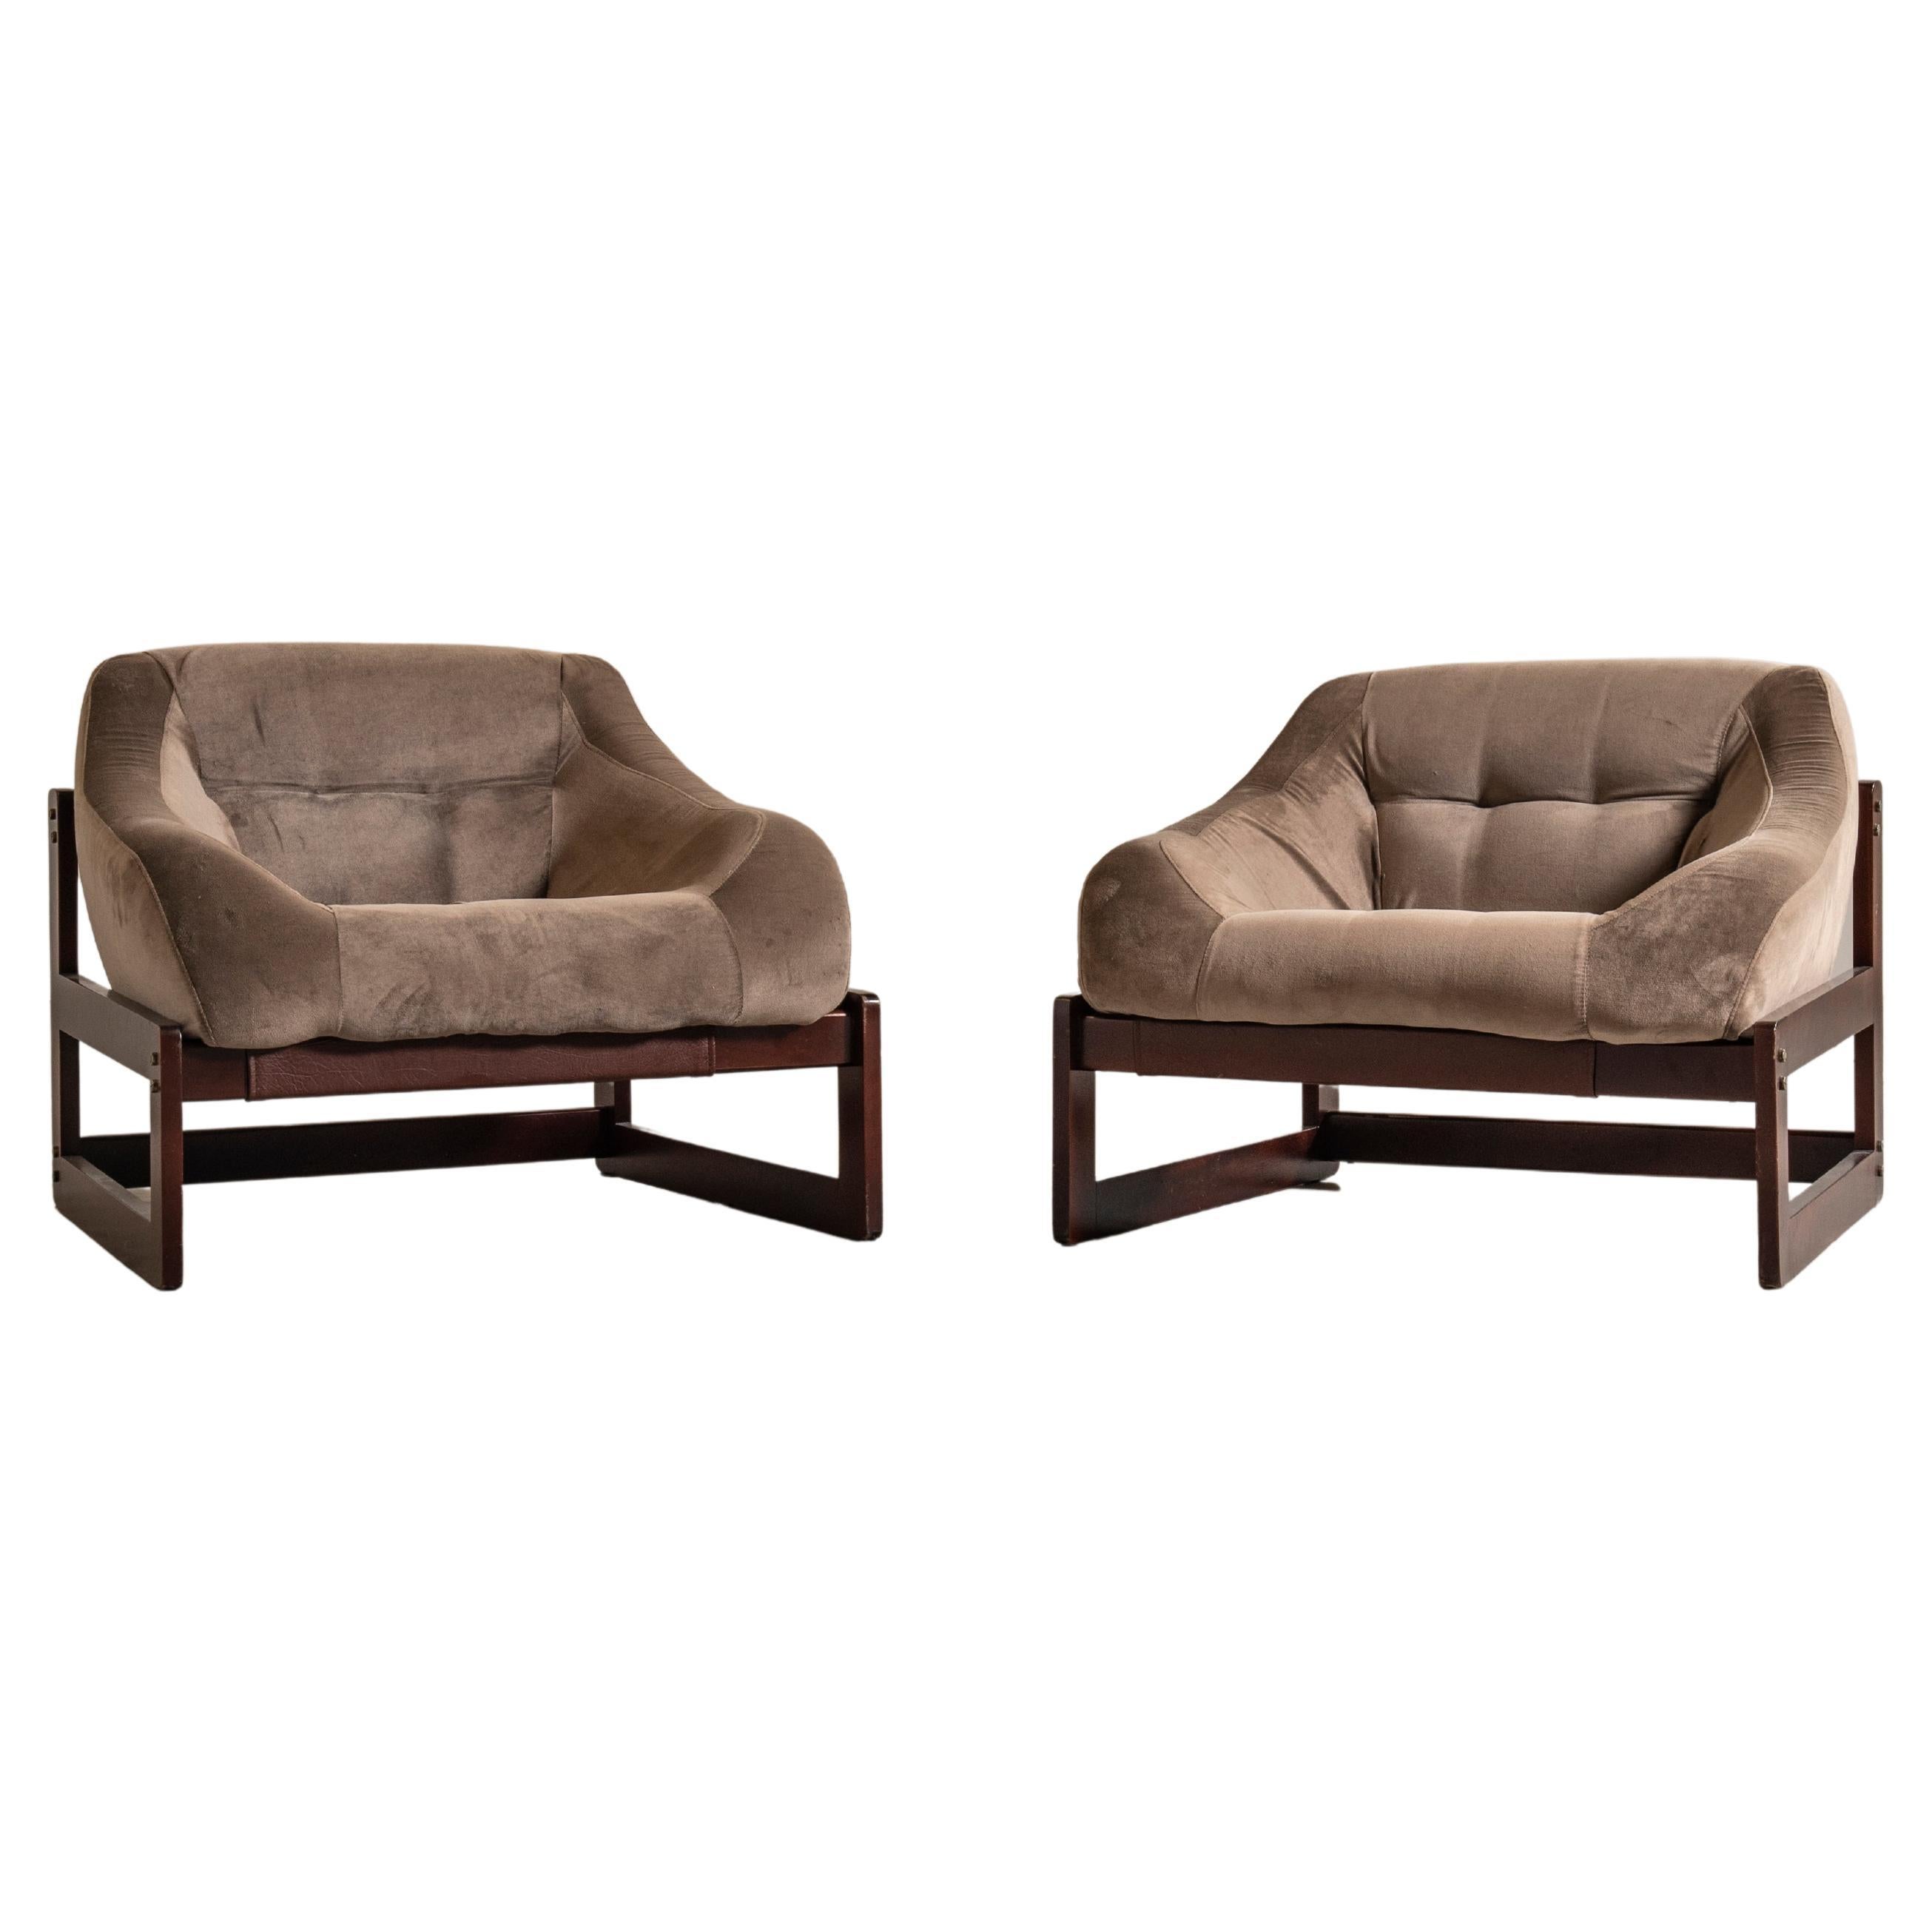 Pair of Midcentury Brazilian Armchairs by Percival Lafer, 1970s For Sale